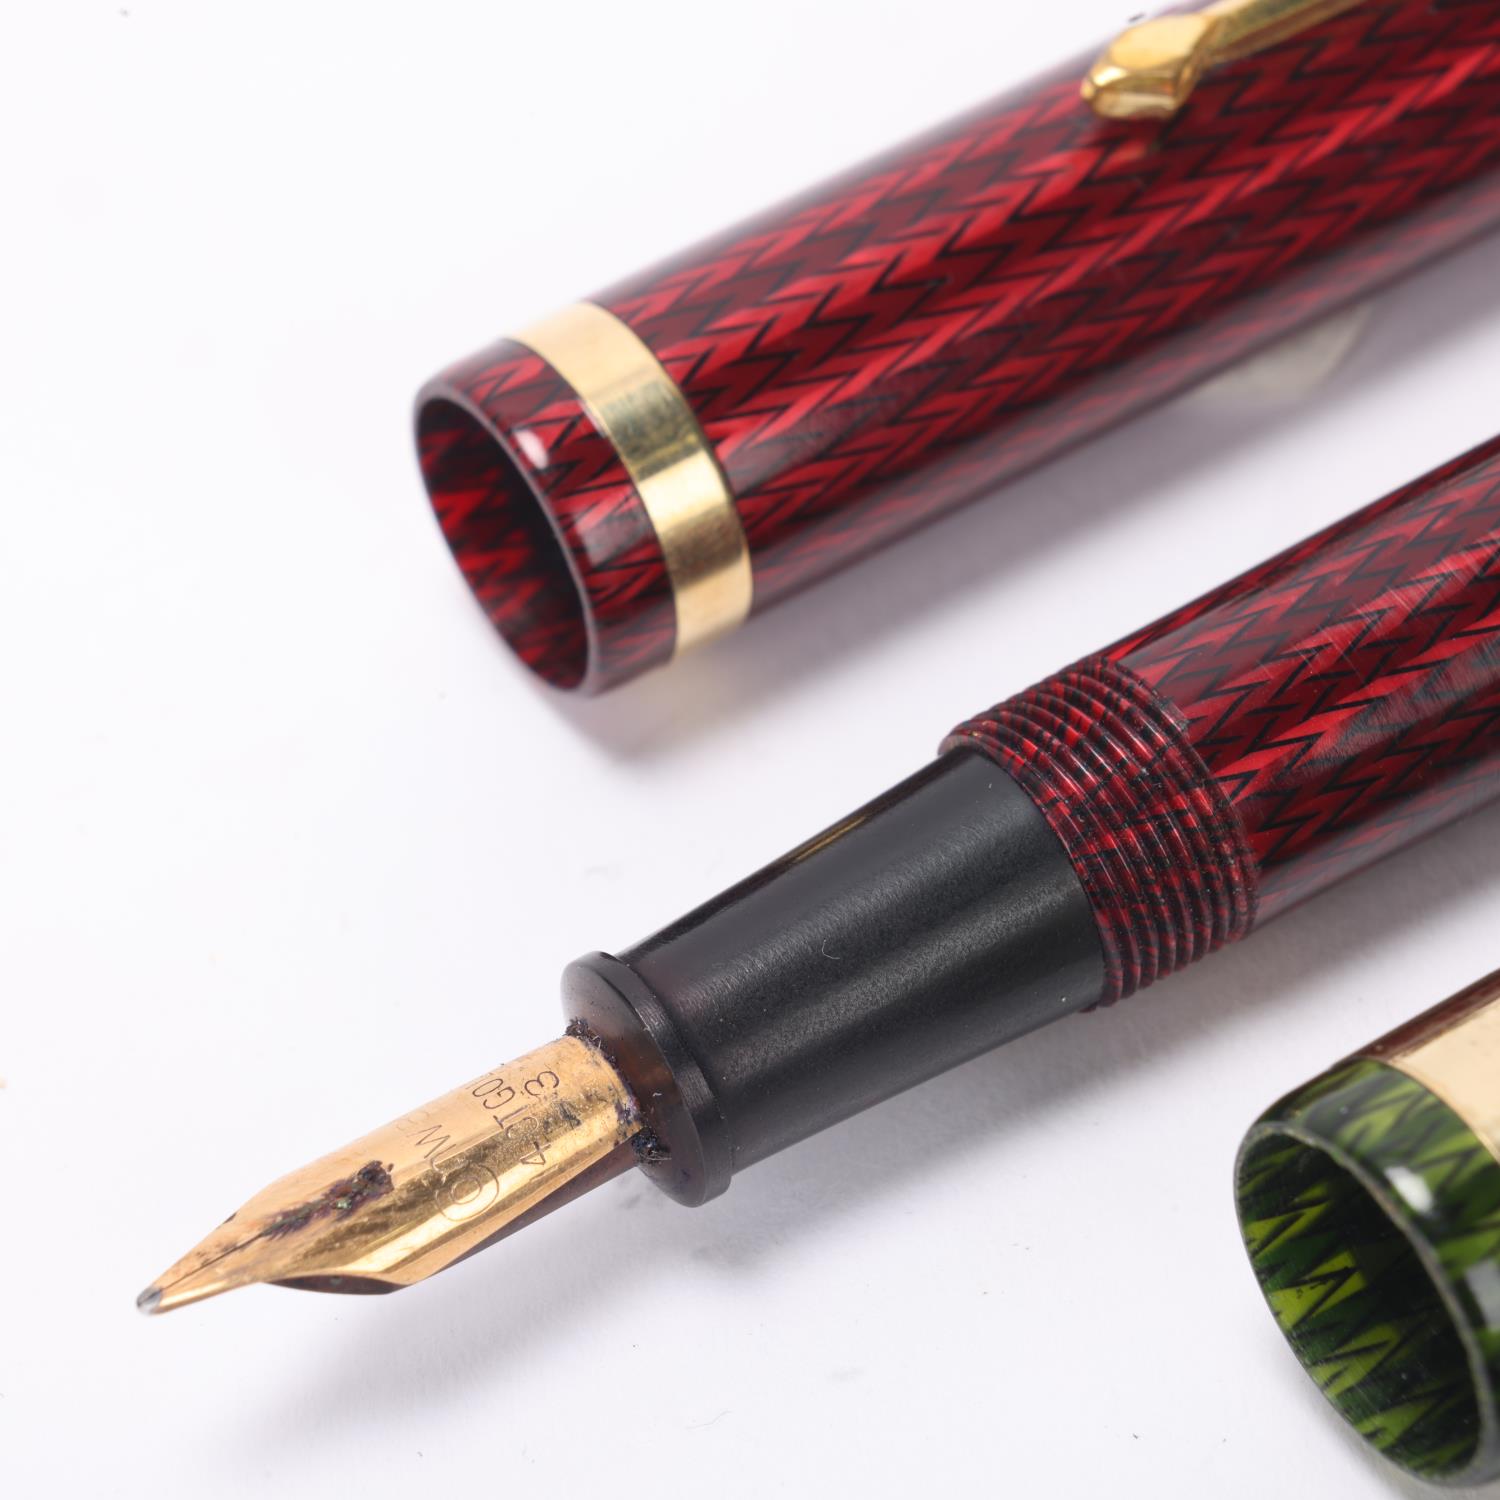 2 vintage Conway Stewart lever fill fountain pens, with 14ct nibs and herringbone lacquer bodies, - Bild 3 aus 4